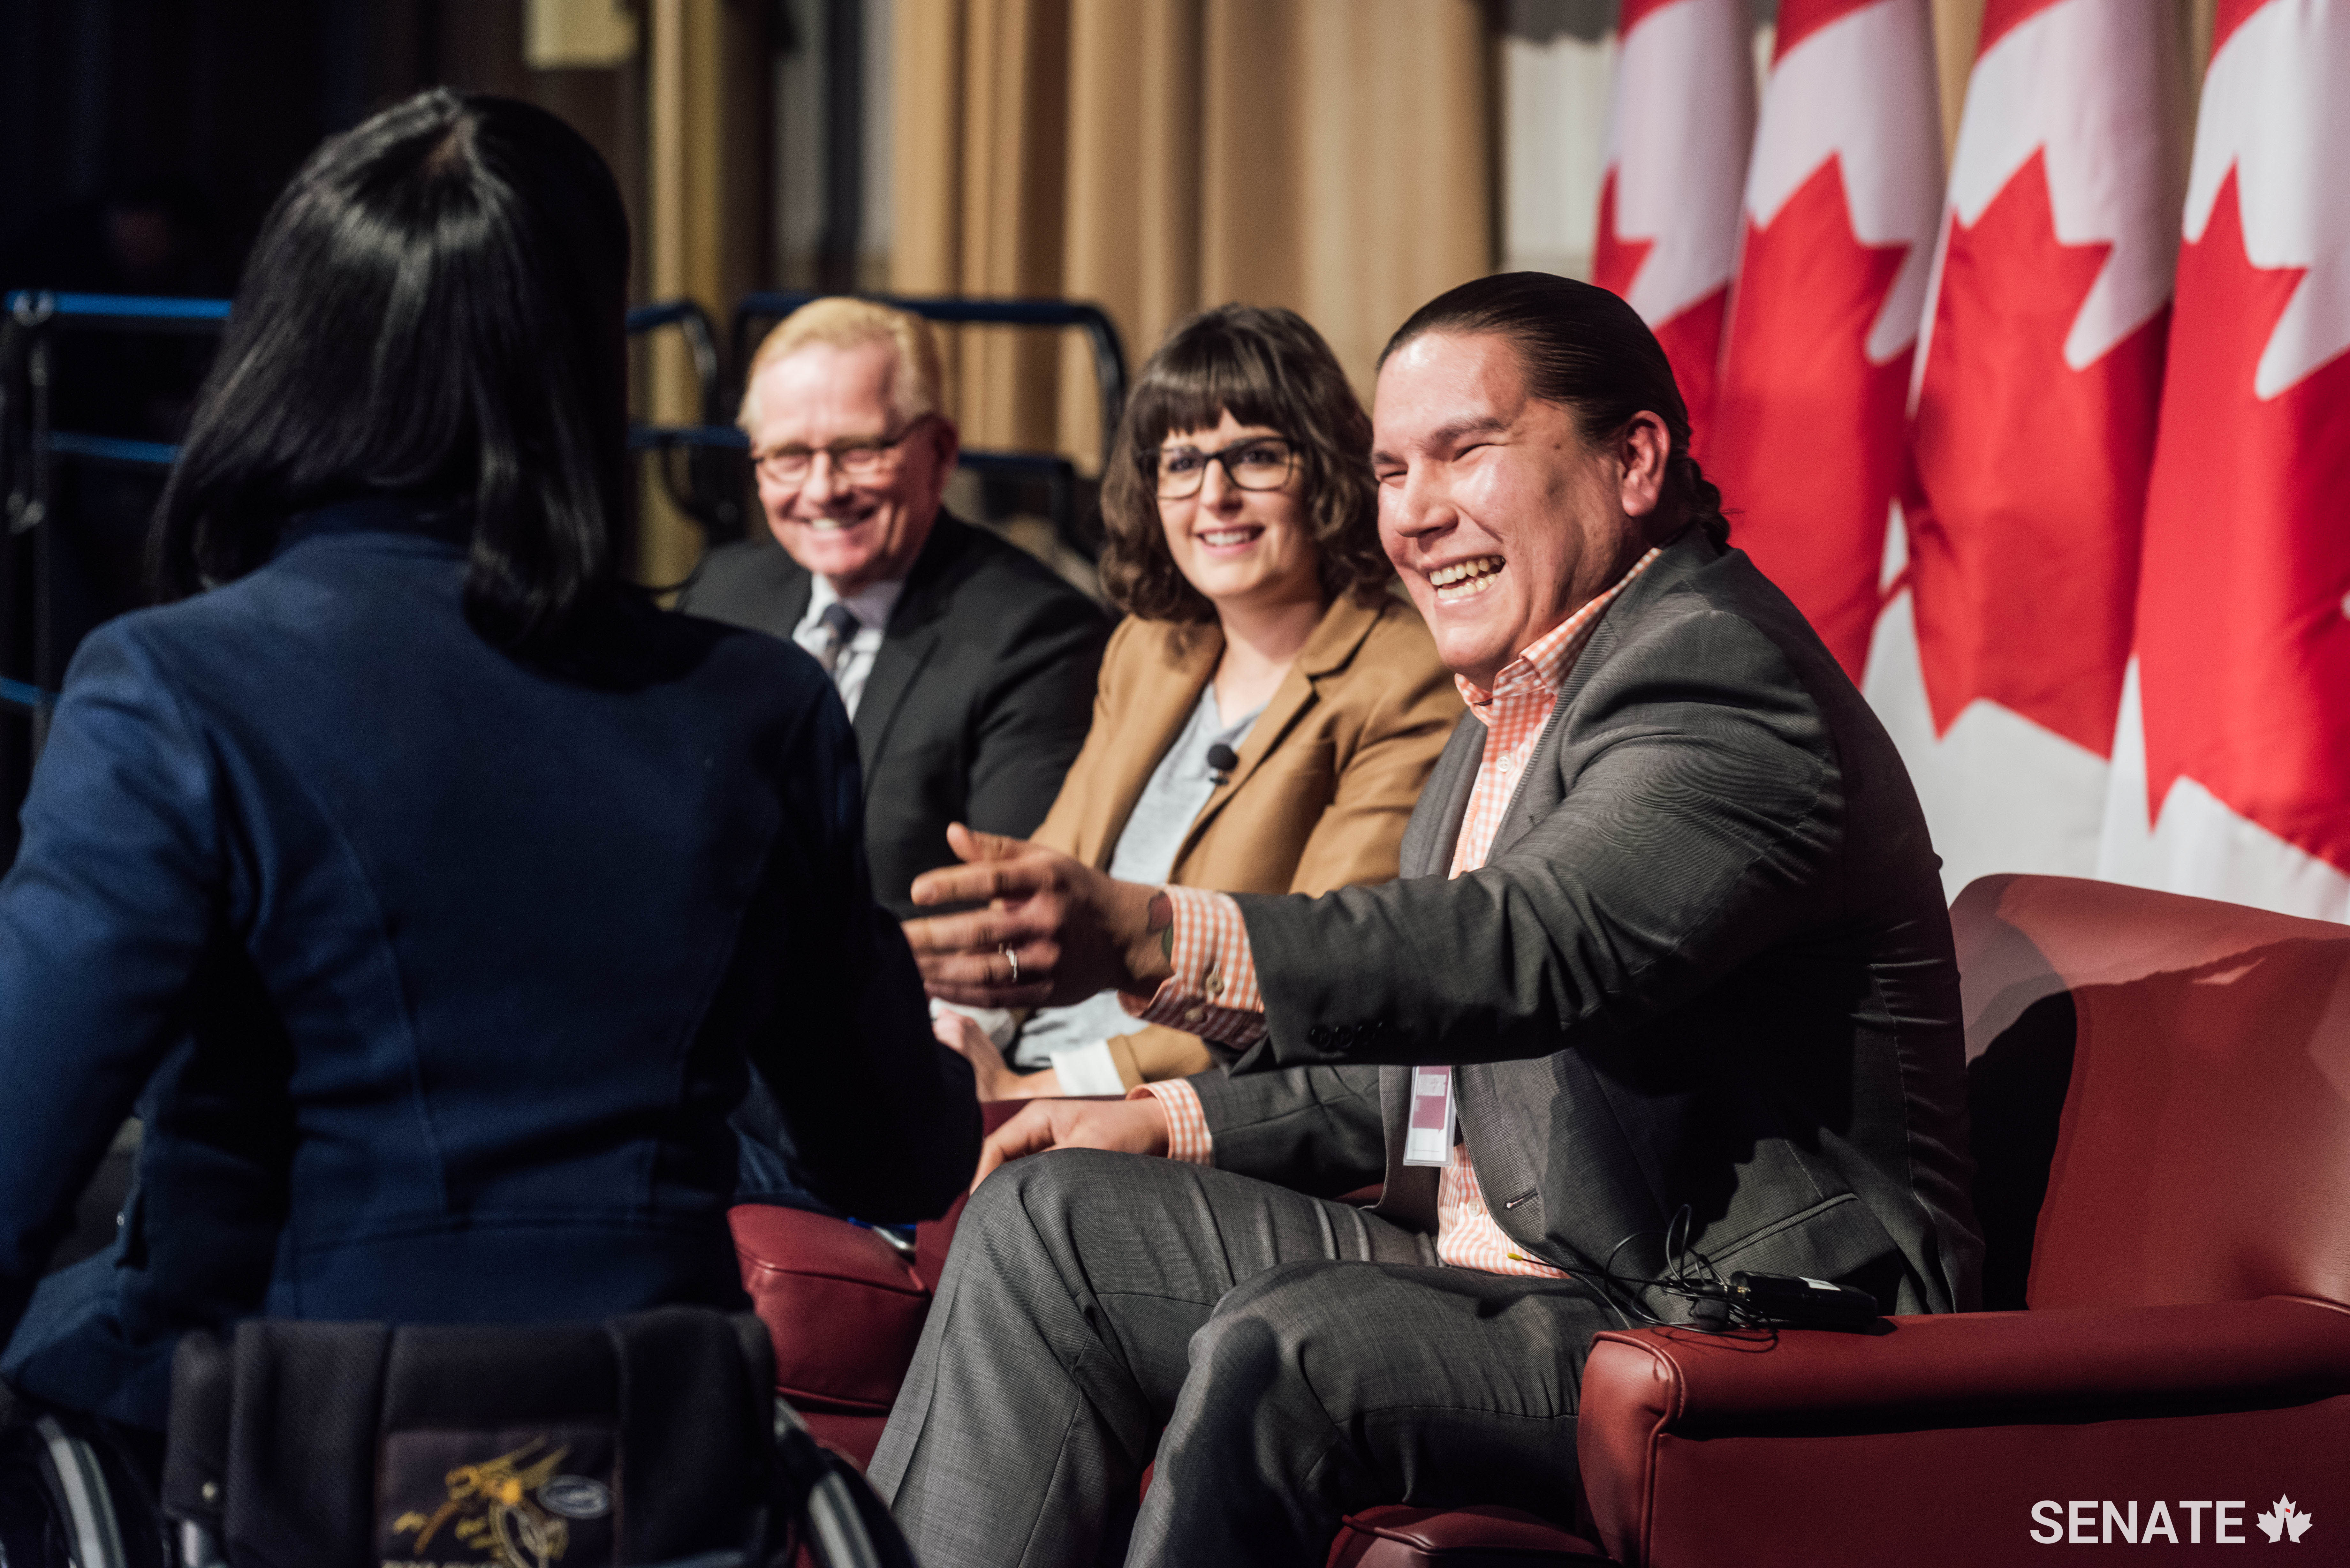 Media panelists share a joke with Senator Petitclerc. The panel included (from right) CBC’s Waubgeshig Rice, Le Devoir’s Marie Vastel and the Globe and Mail’s Robert Fife.